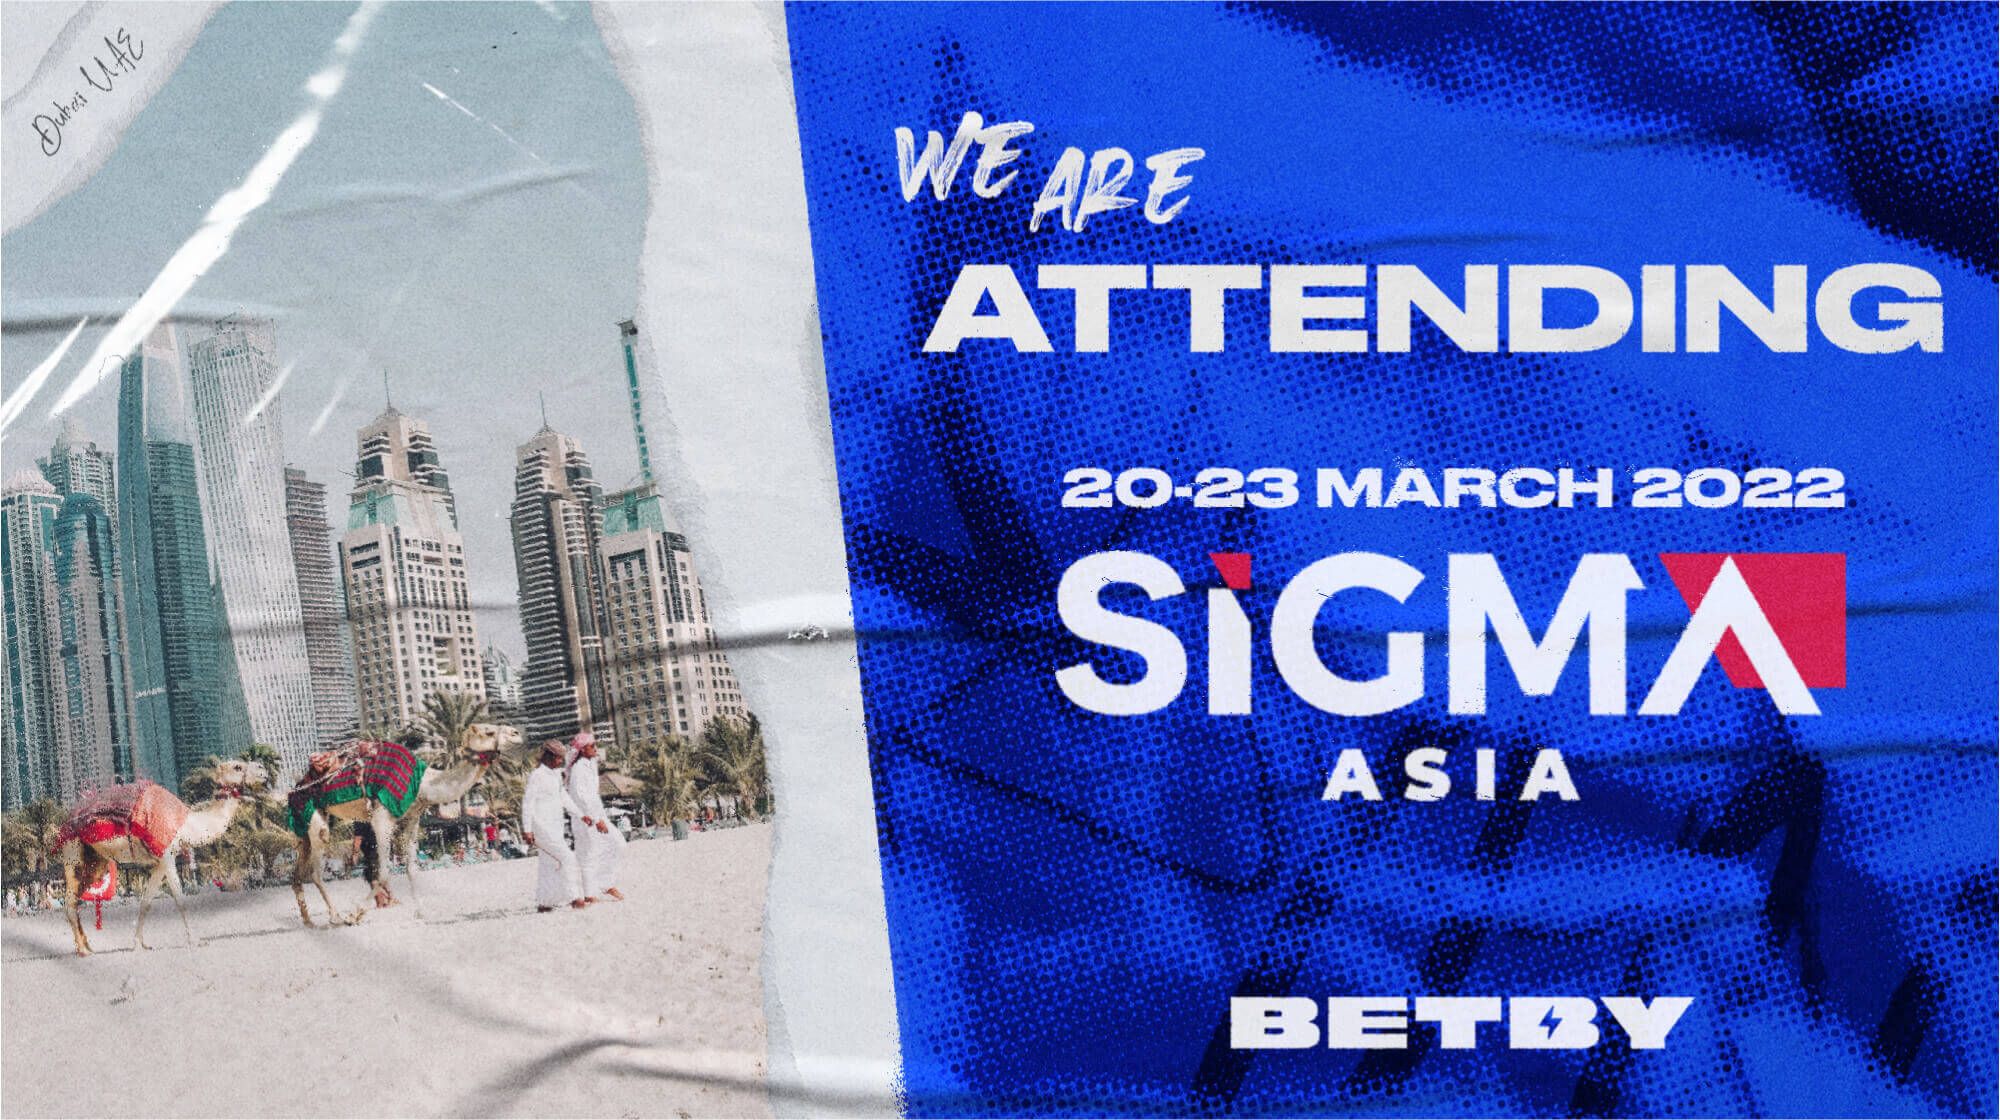 BETBY attending SiGMA Asia conference in Dubai